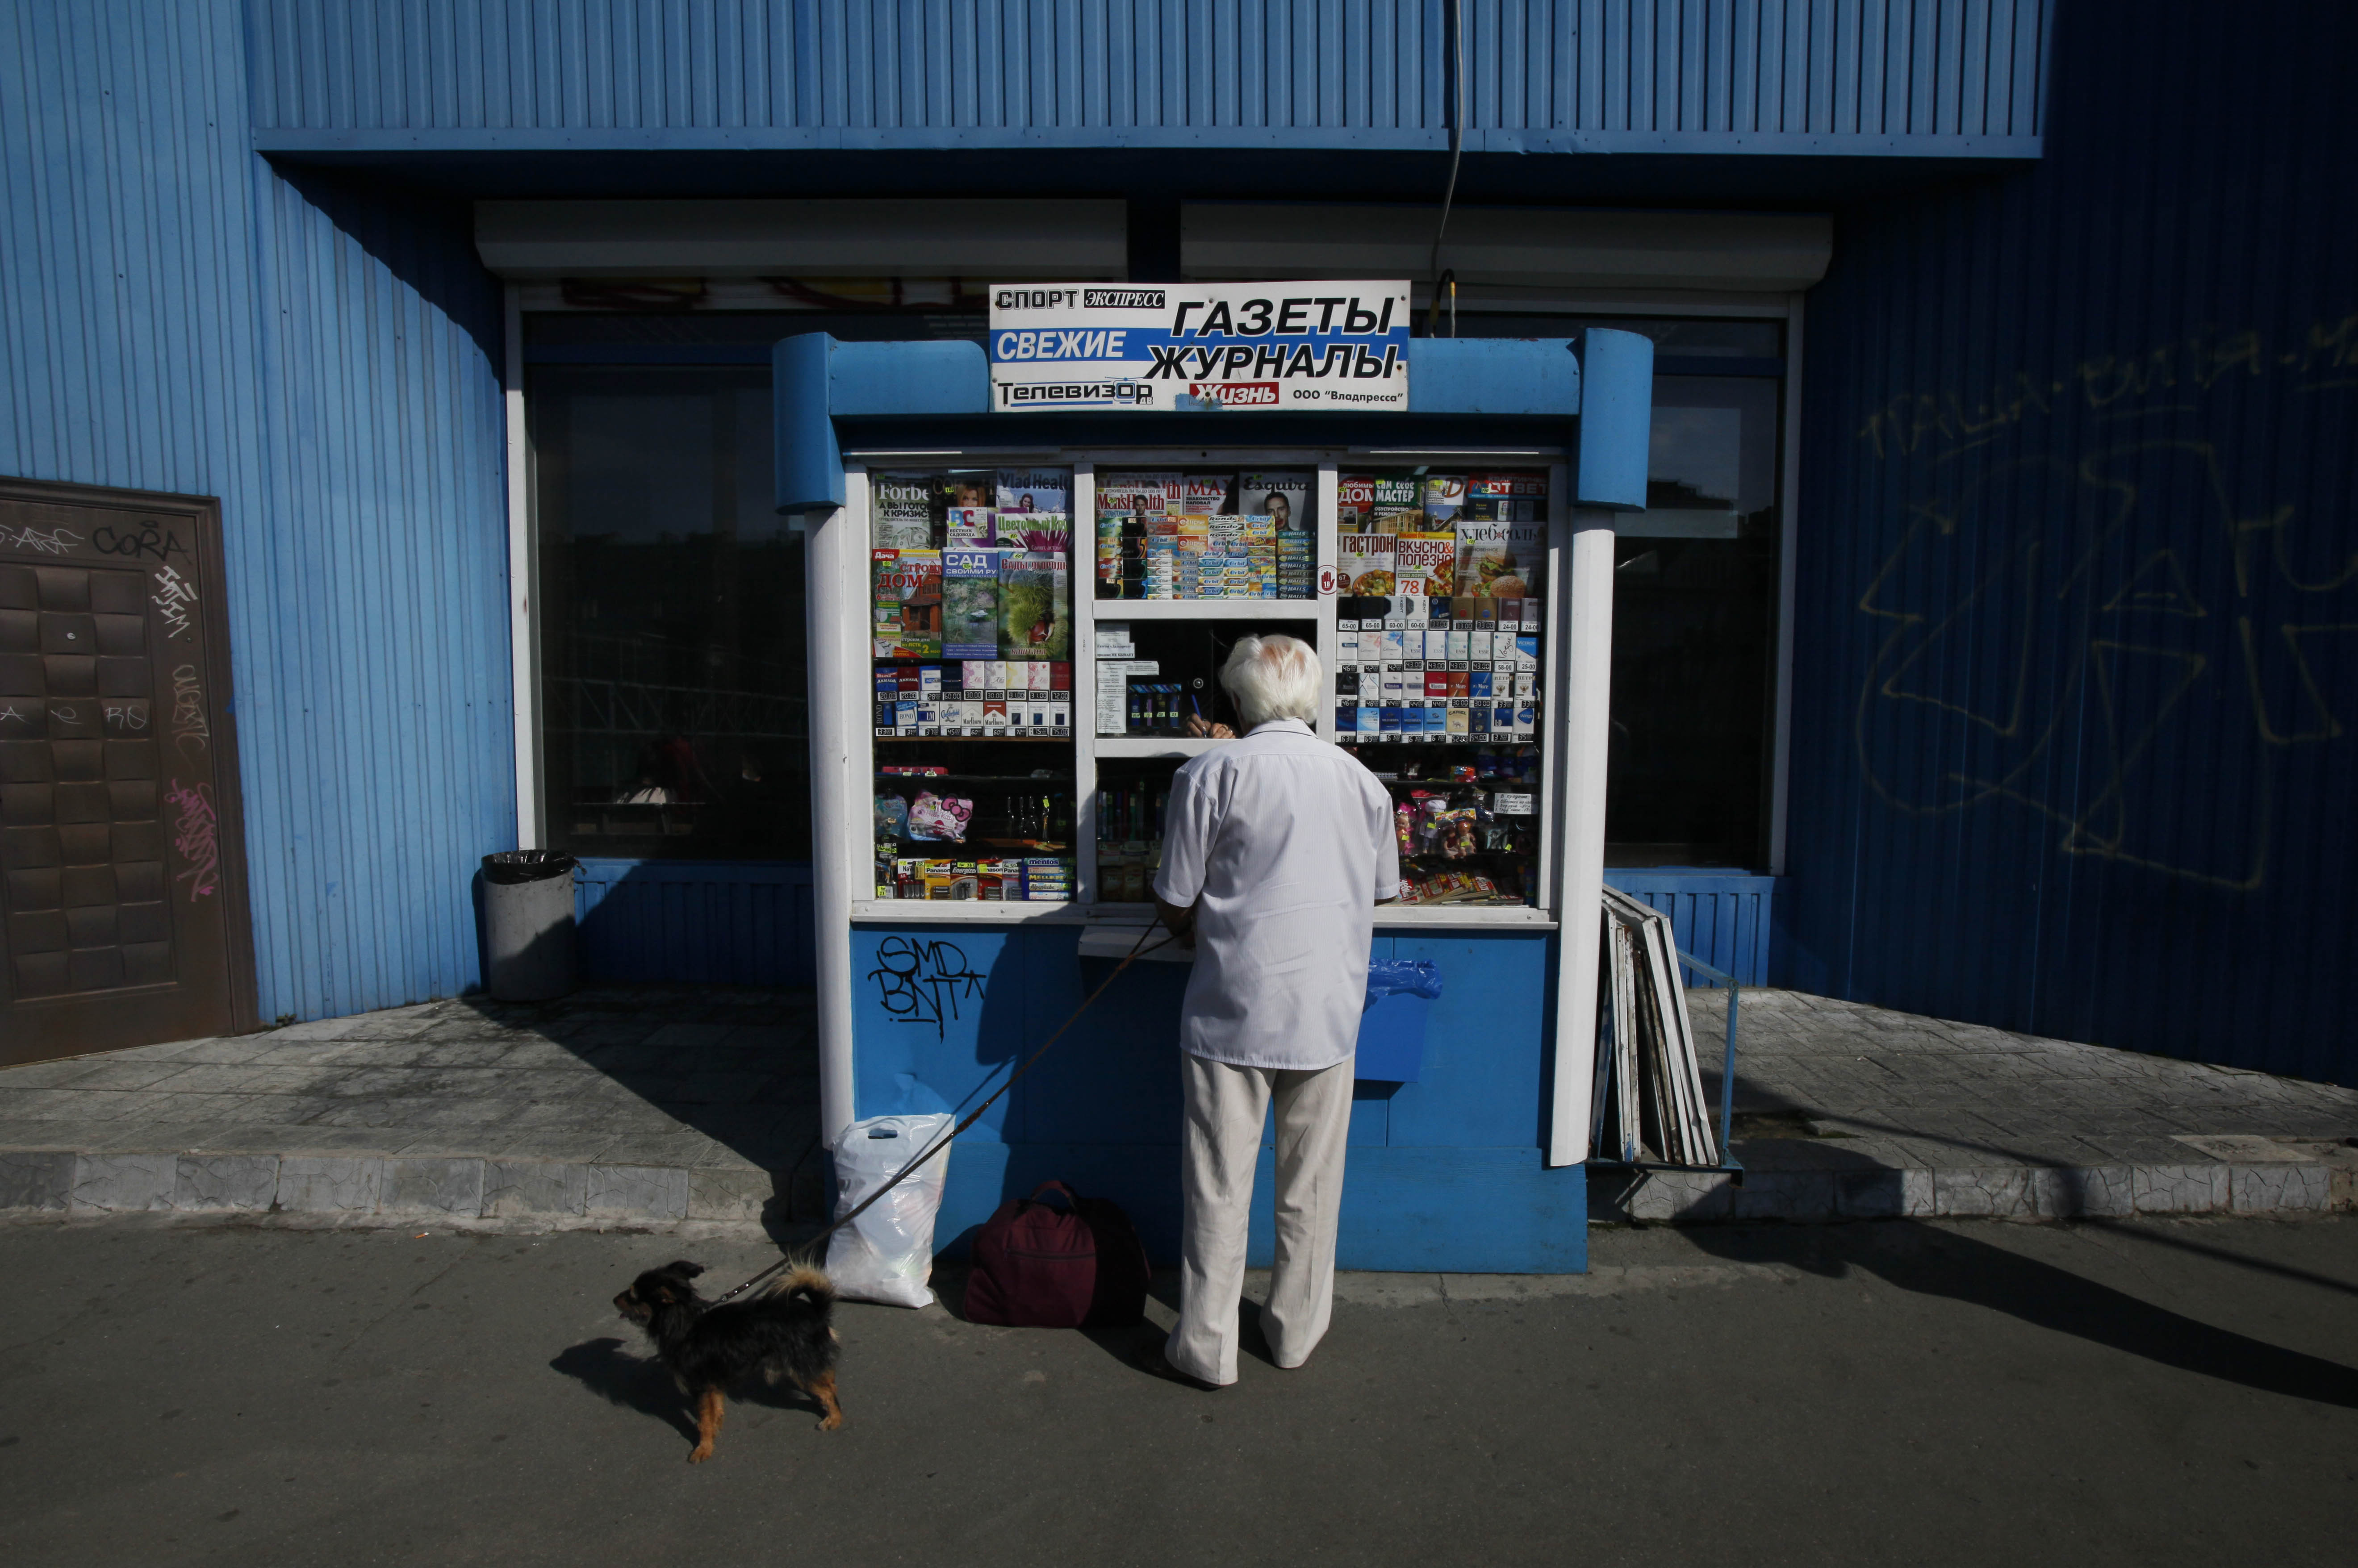 A man buys goods at a stall in Vladivostok, in eastern Russia Monday, Sept. 10, 2012. (AP Photo/Greg Baker)